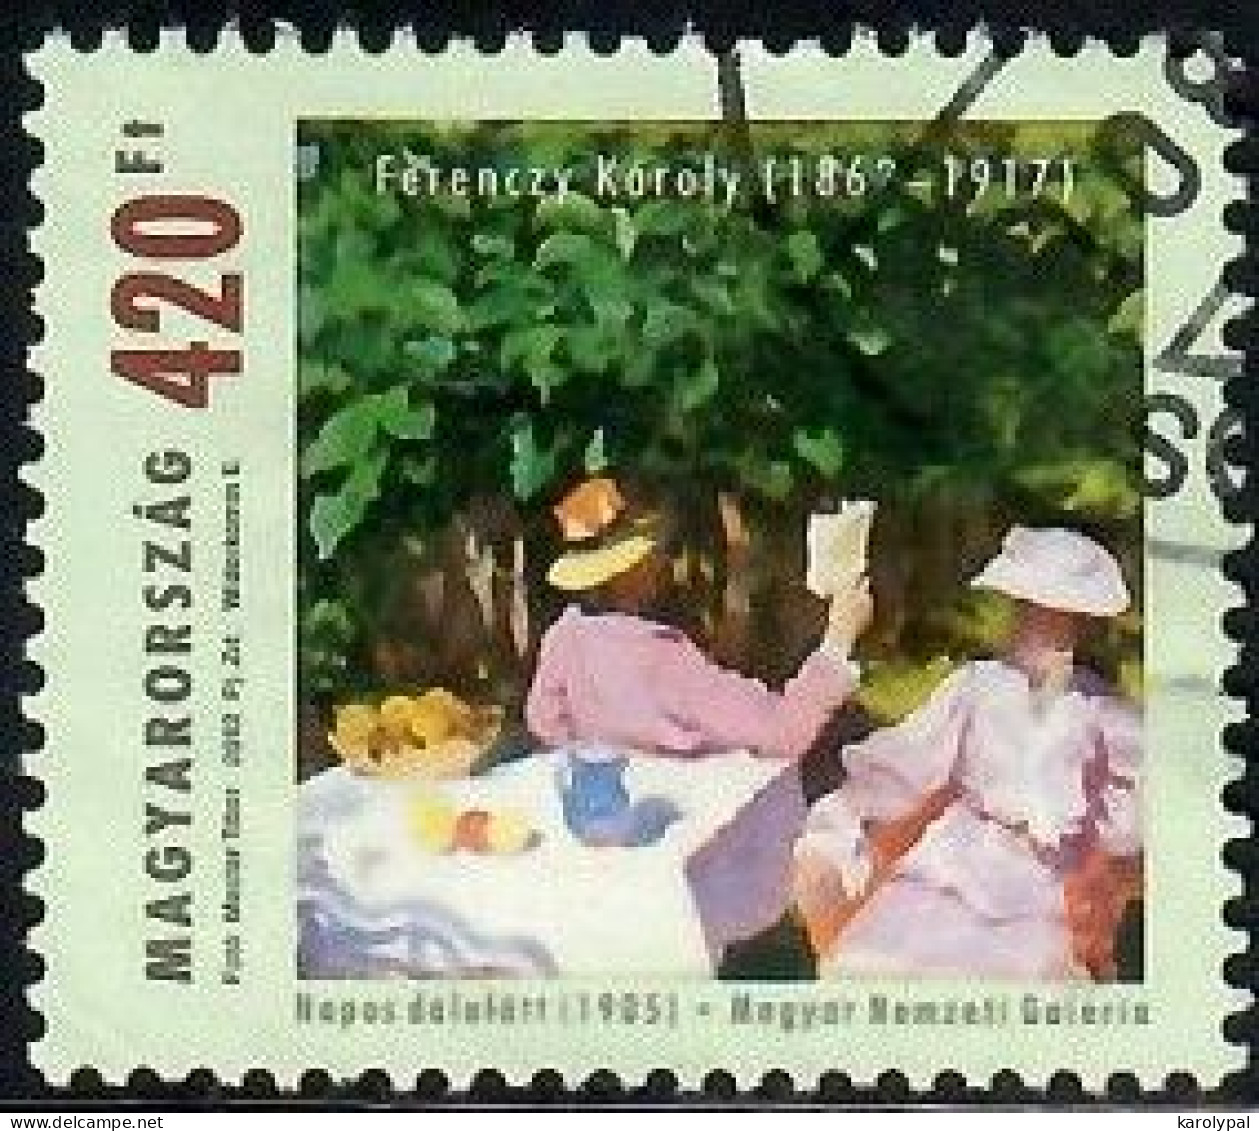 Hungary, 2012, Used, Sunny Morning (1905), By Károly Ferenczy, Mi. Nr.5542, - Gebraucht